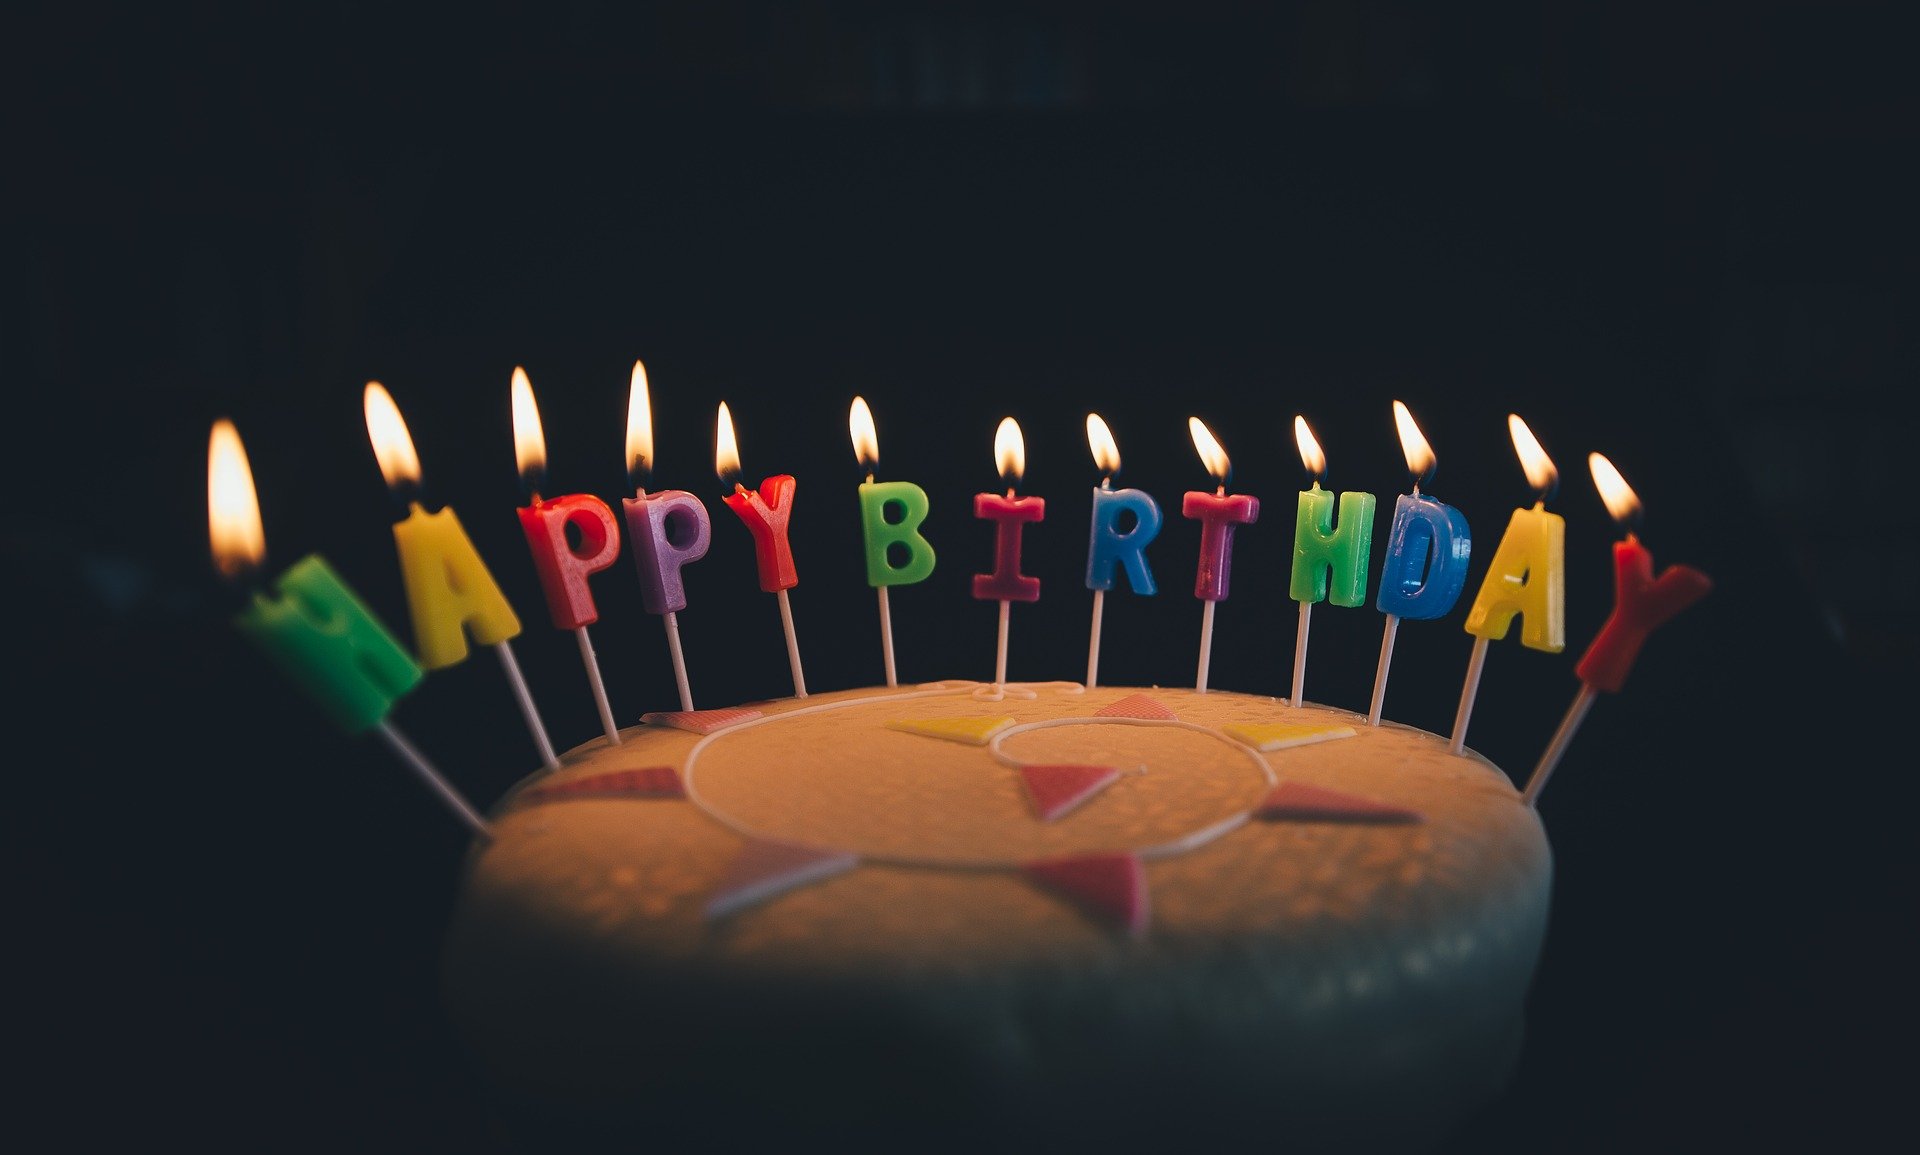 A Birthday cake with lit candles. | Source: Pixabay.